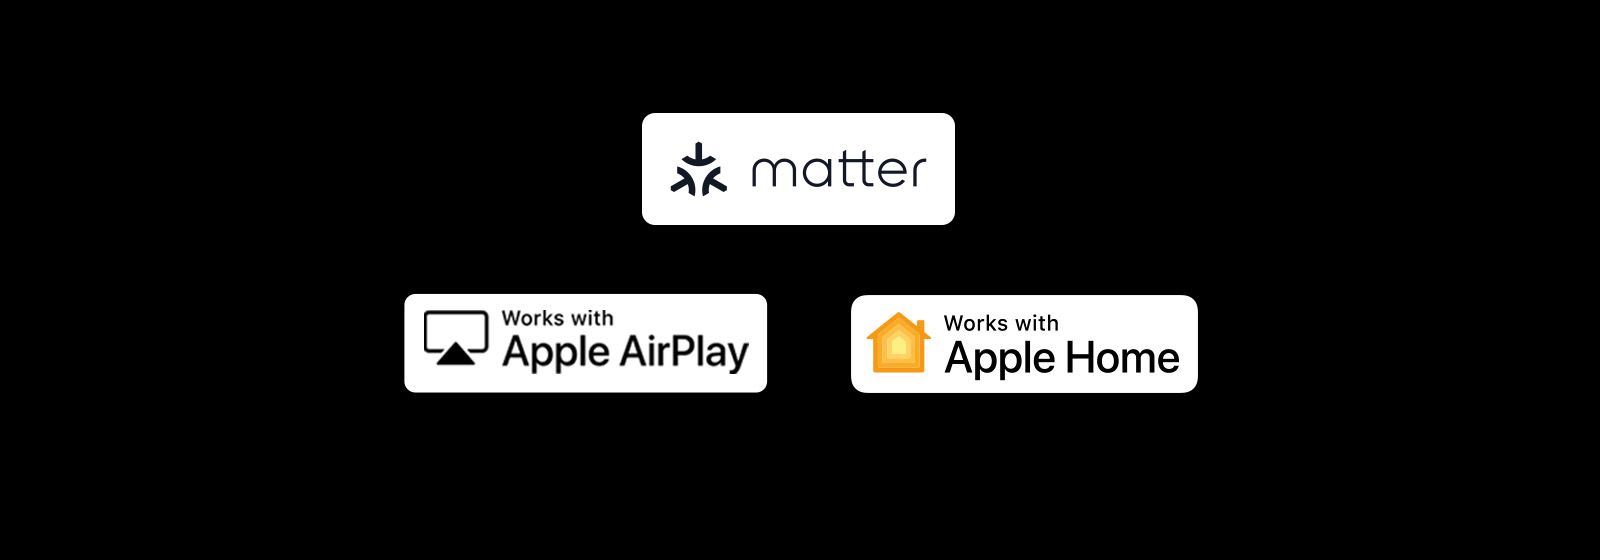 Apple AirPlay logo Works with Apple Home logo Works with Matter logo